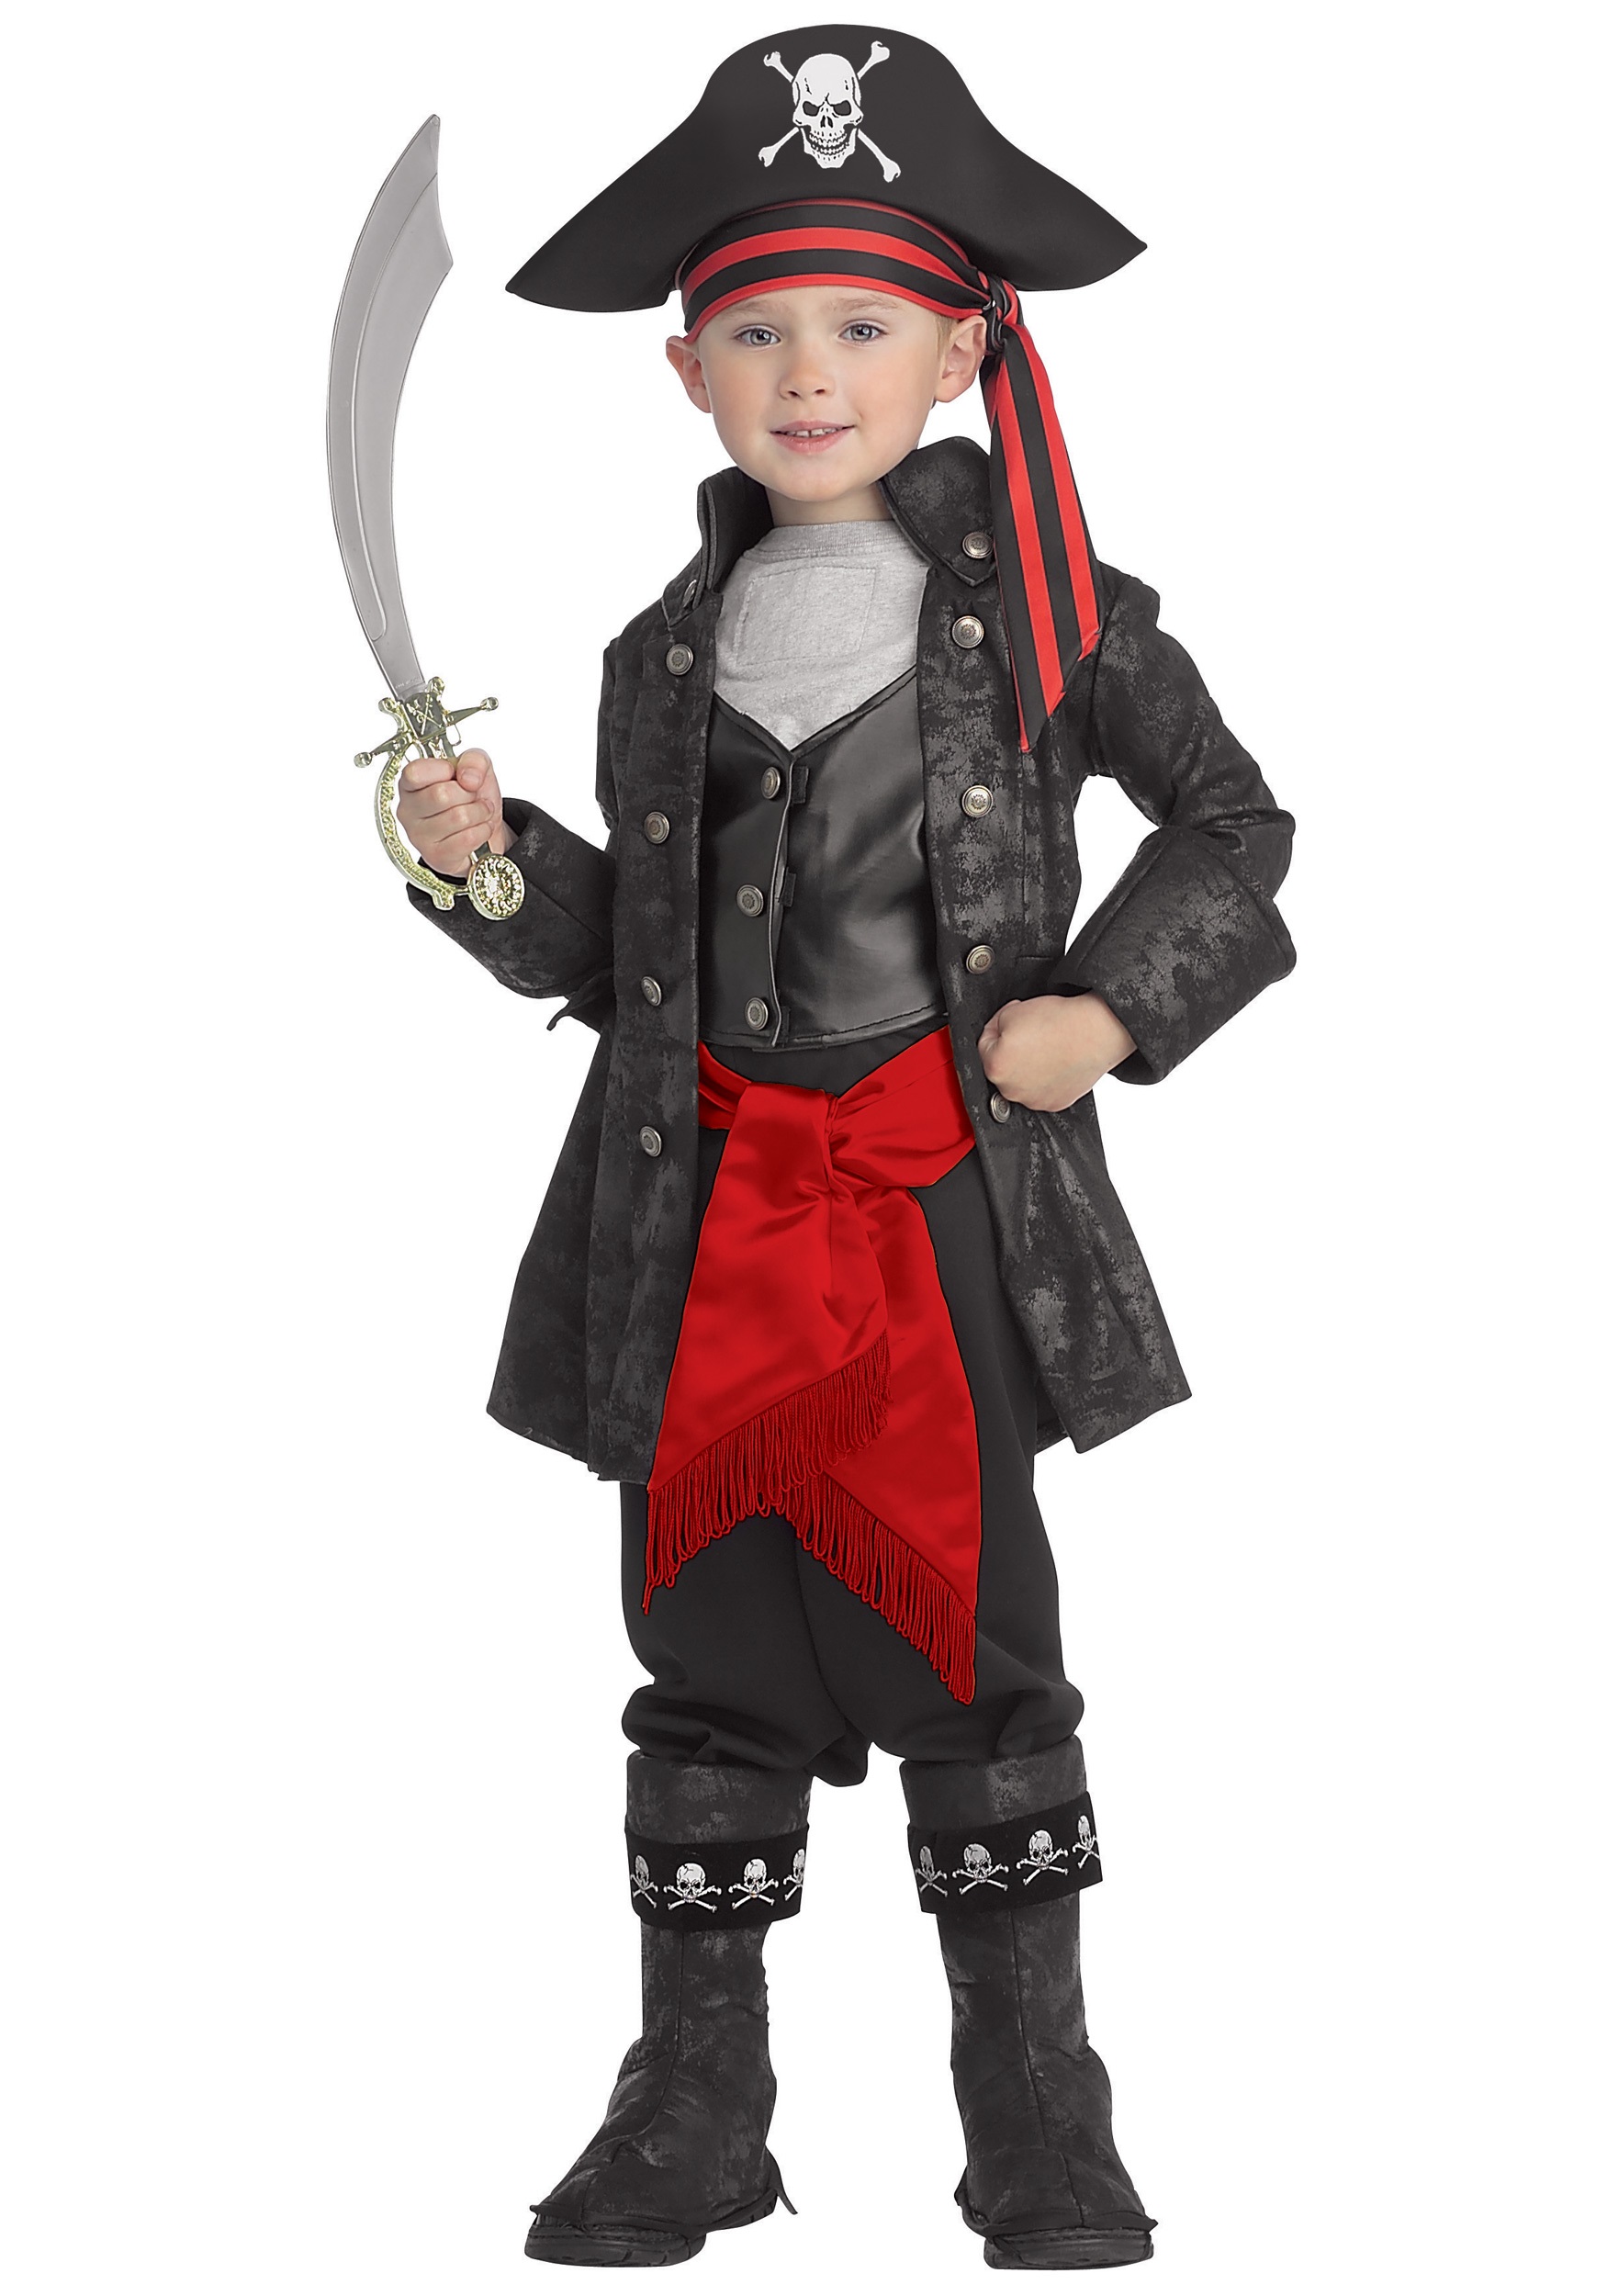 Details about   Caribbean Pirate kids boys Halloween costume 